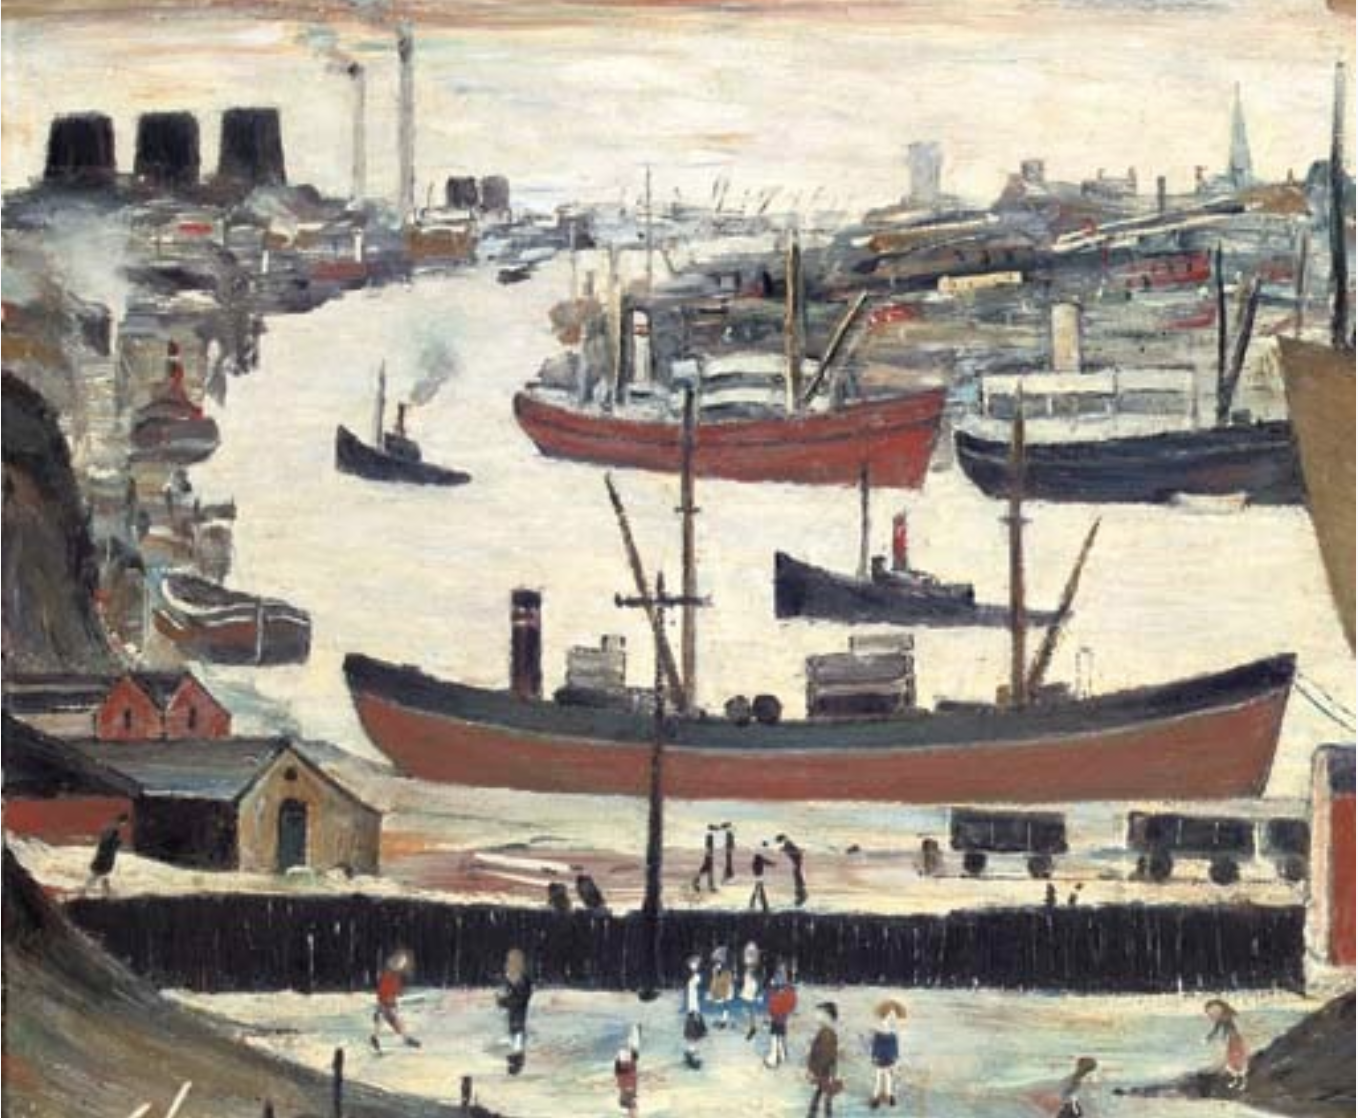 Shipping, Sunderland (1962) by Laurence Stephen Lowry (1887 - 1976), English artist.